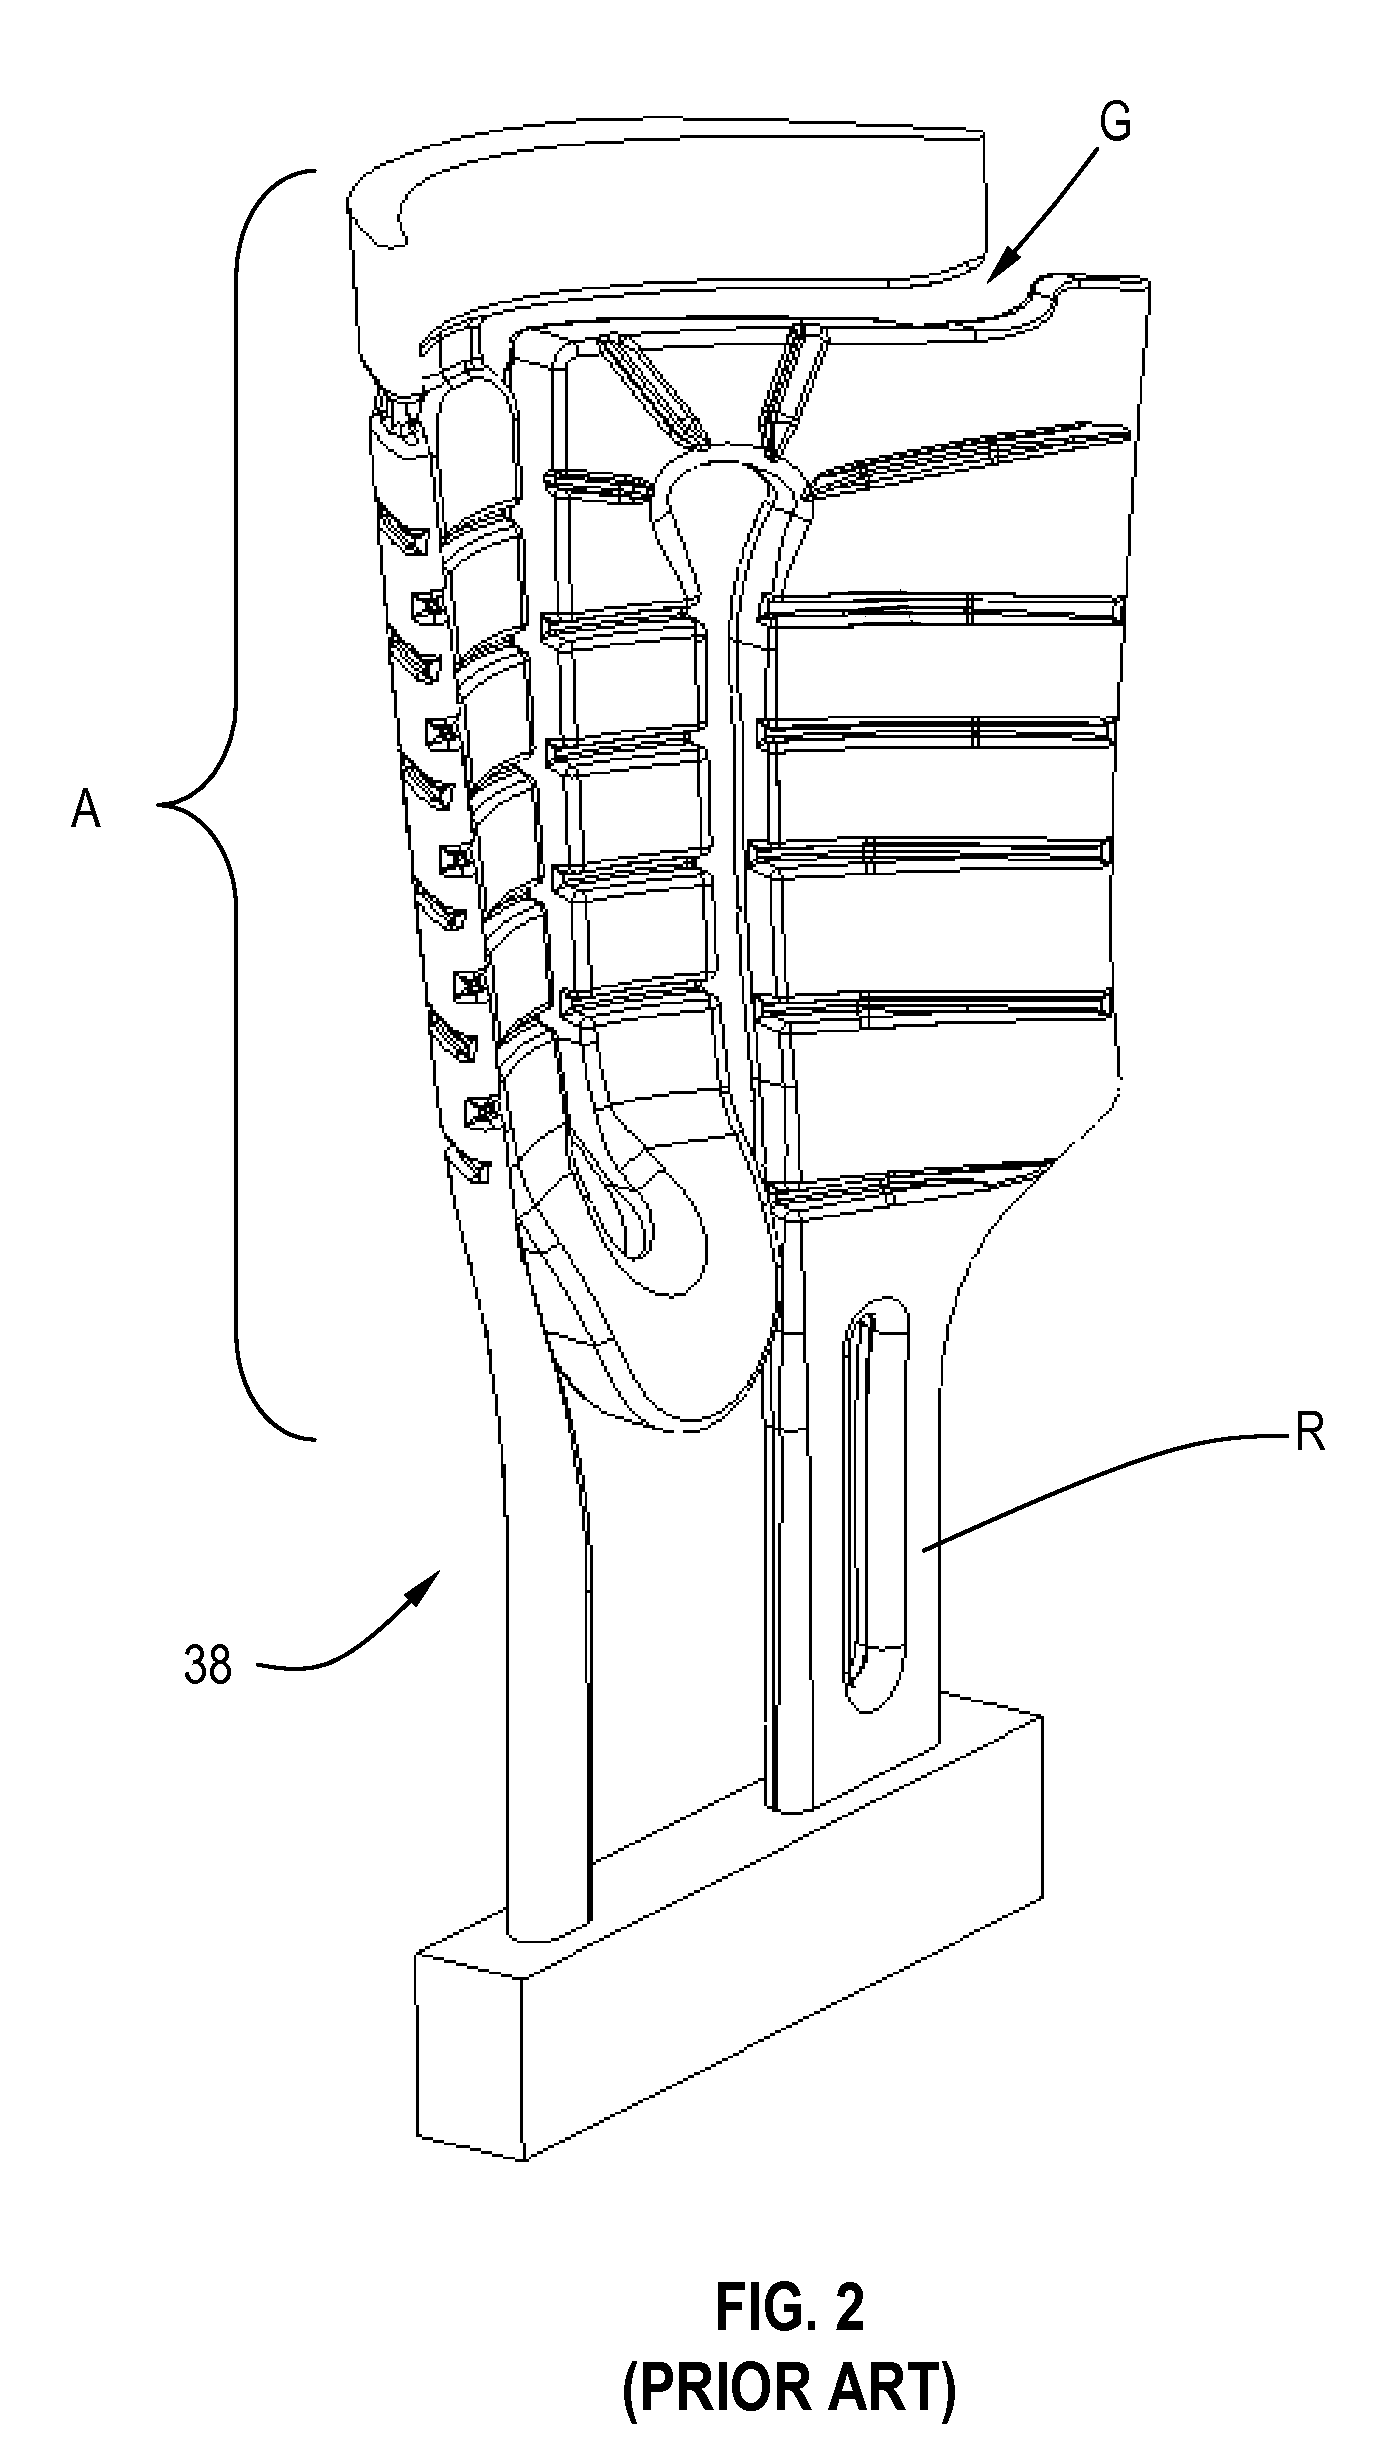 Method of fabricating turbine airfoils and tip structures therefor